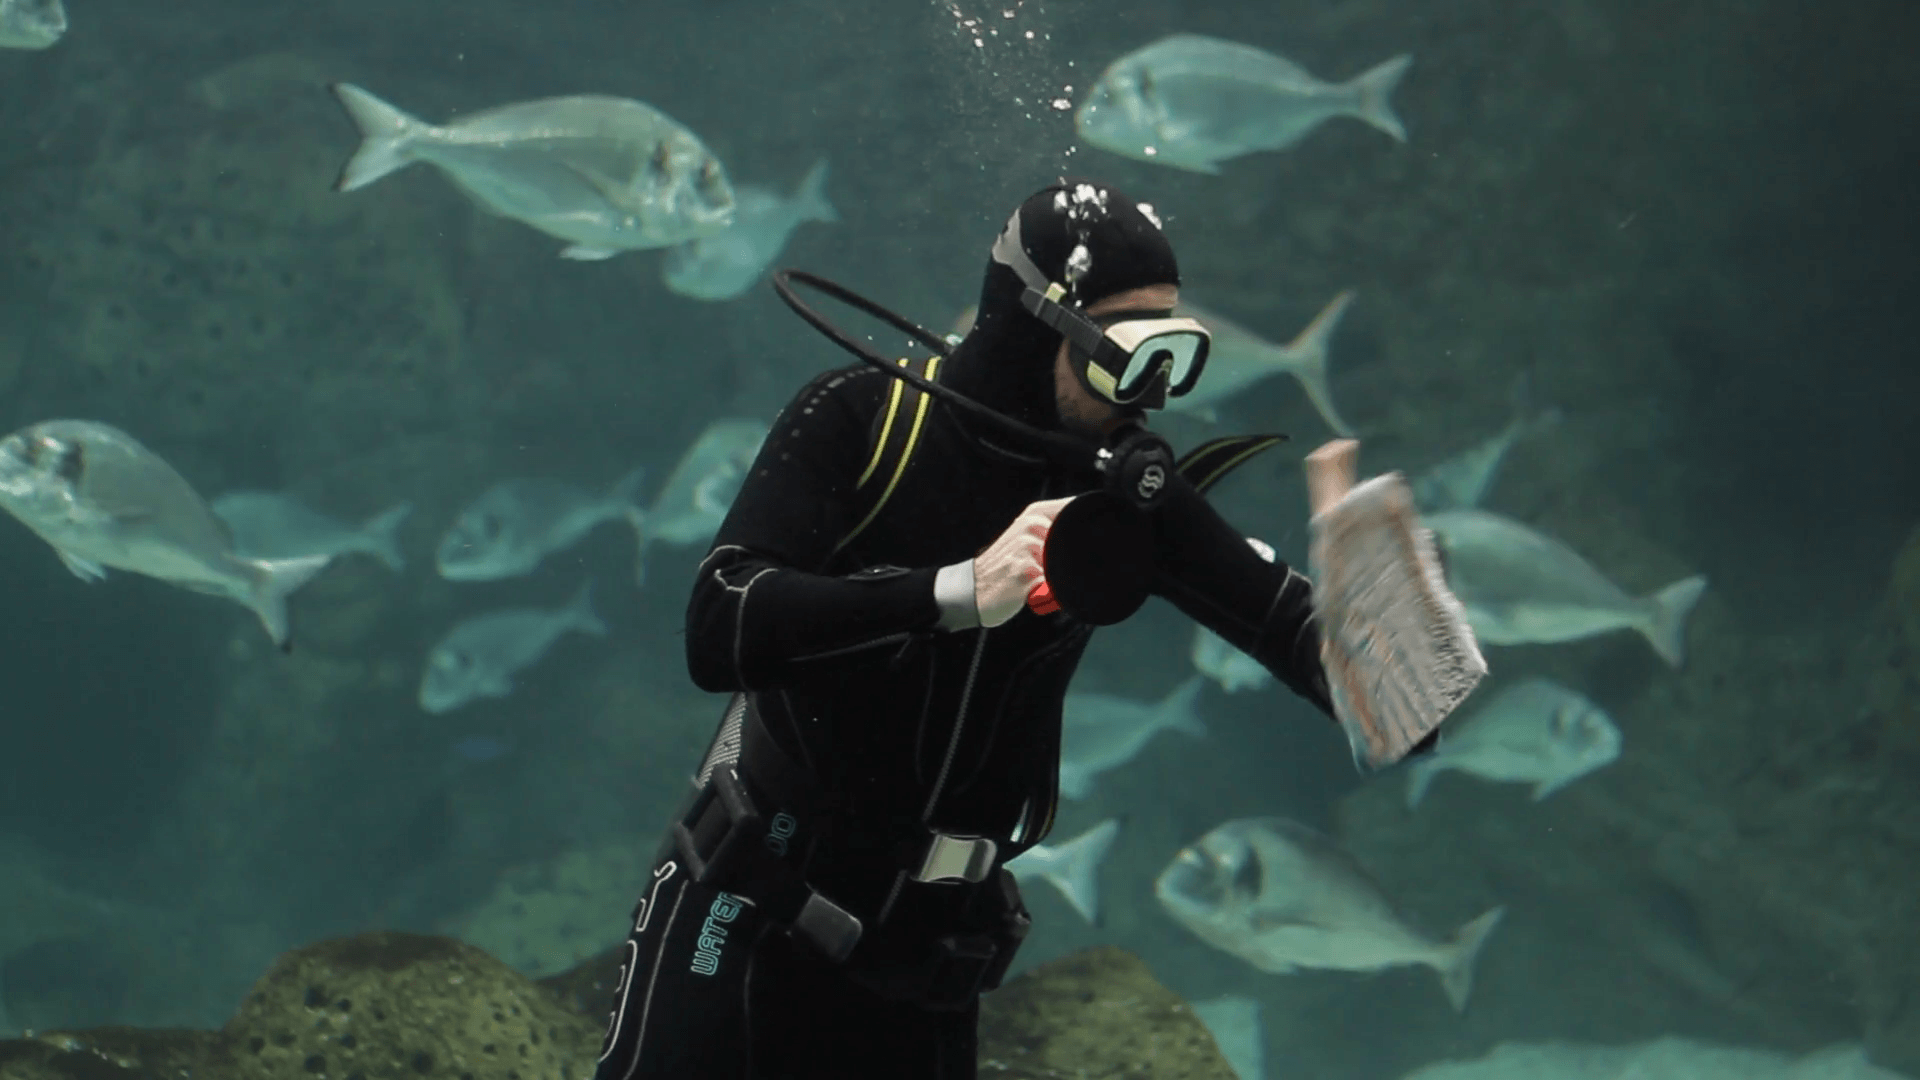 Diver cleaning glass in an aquarium tank and fish swarm in